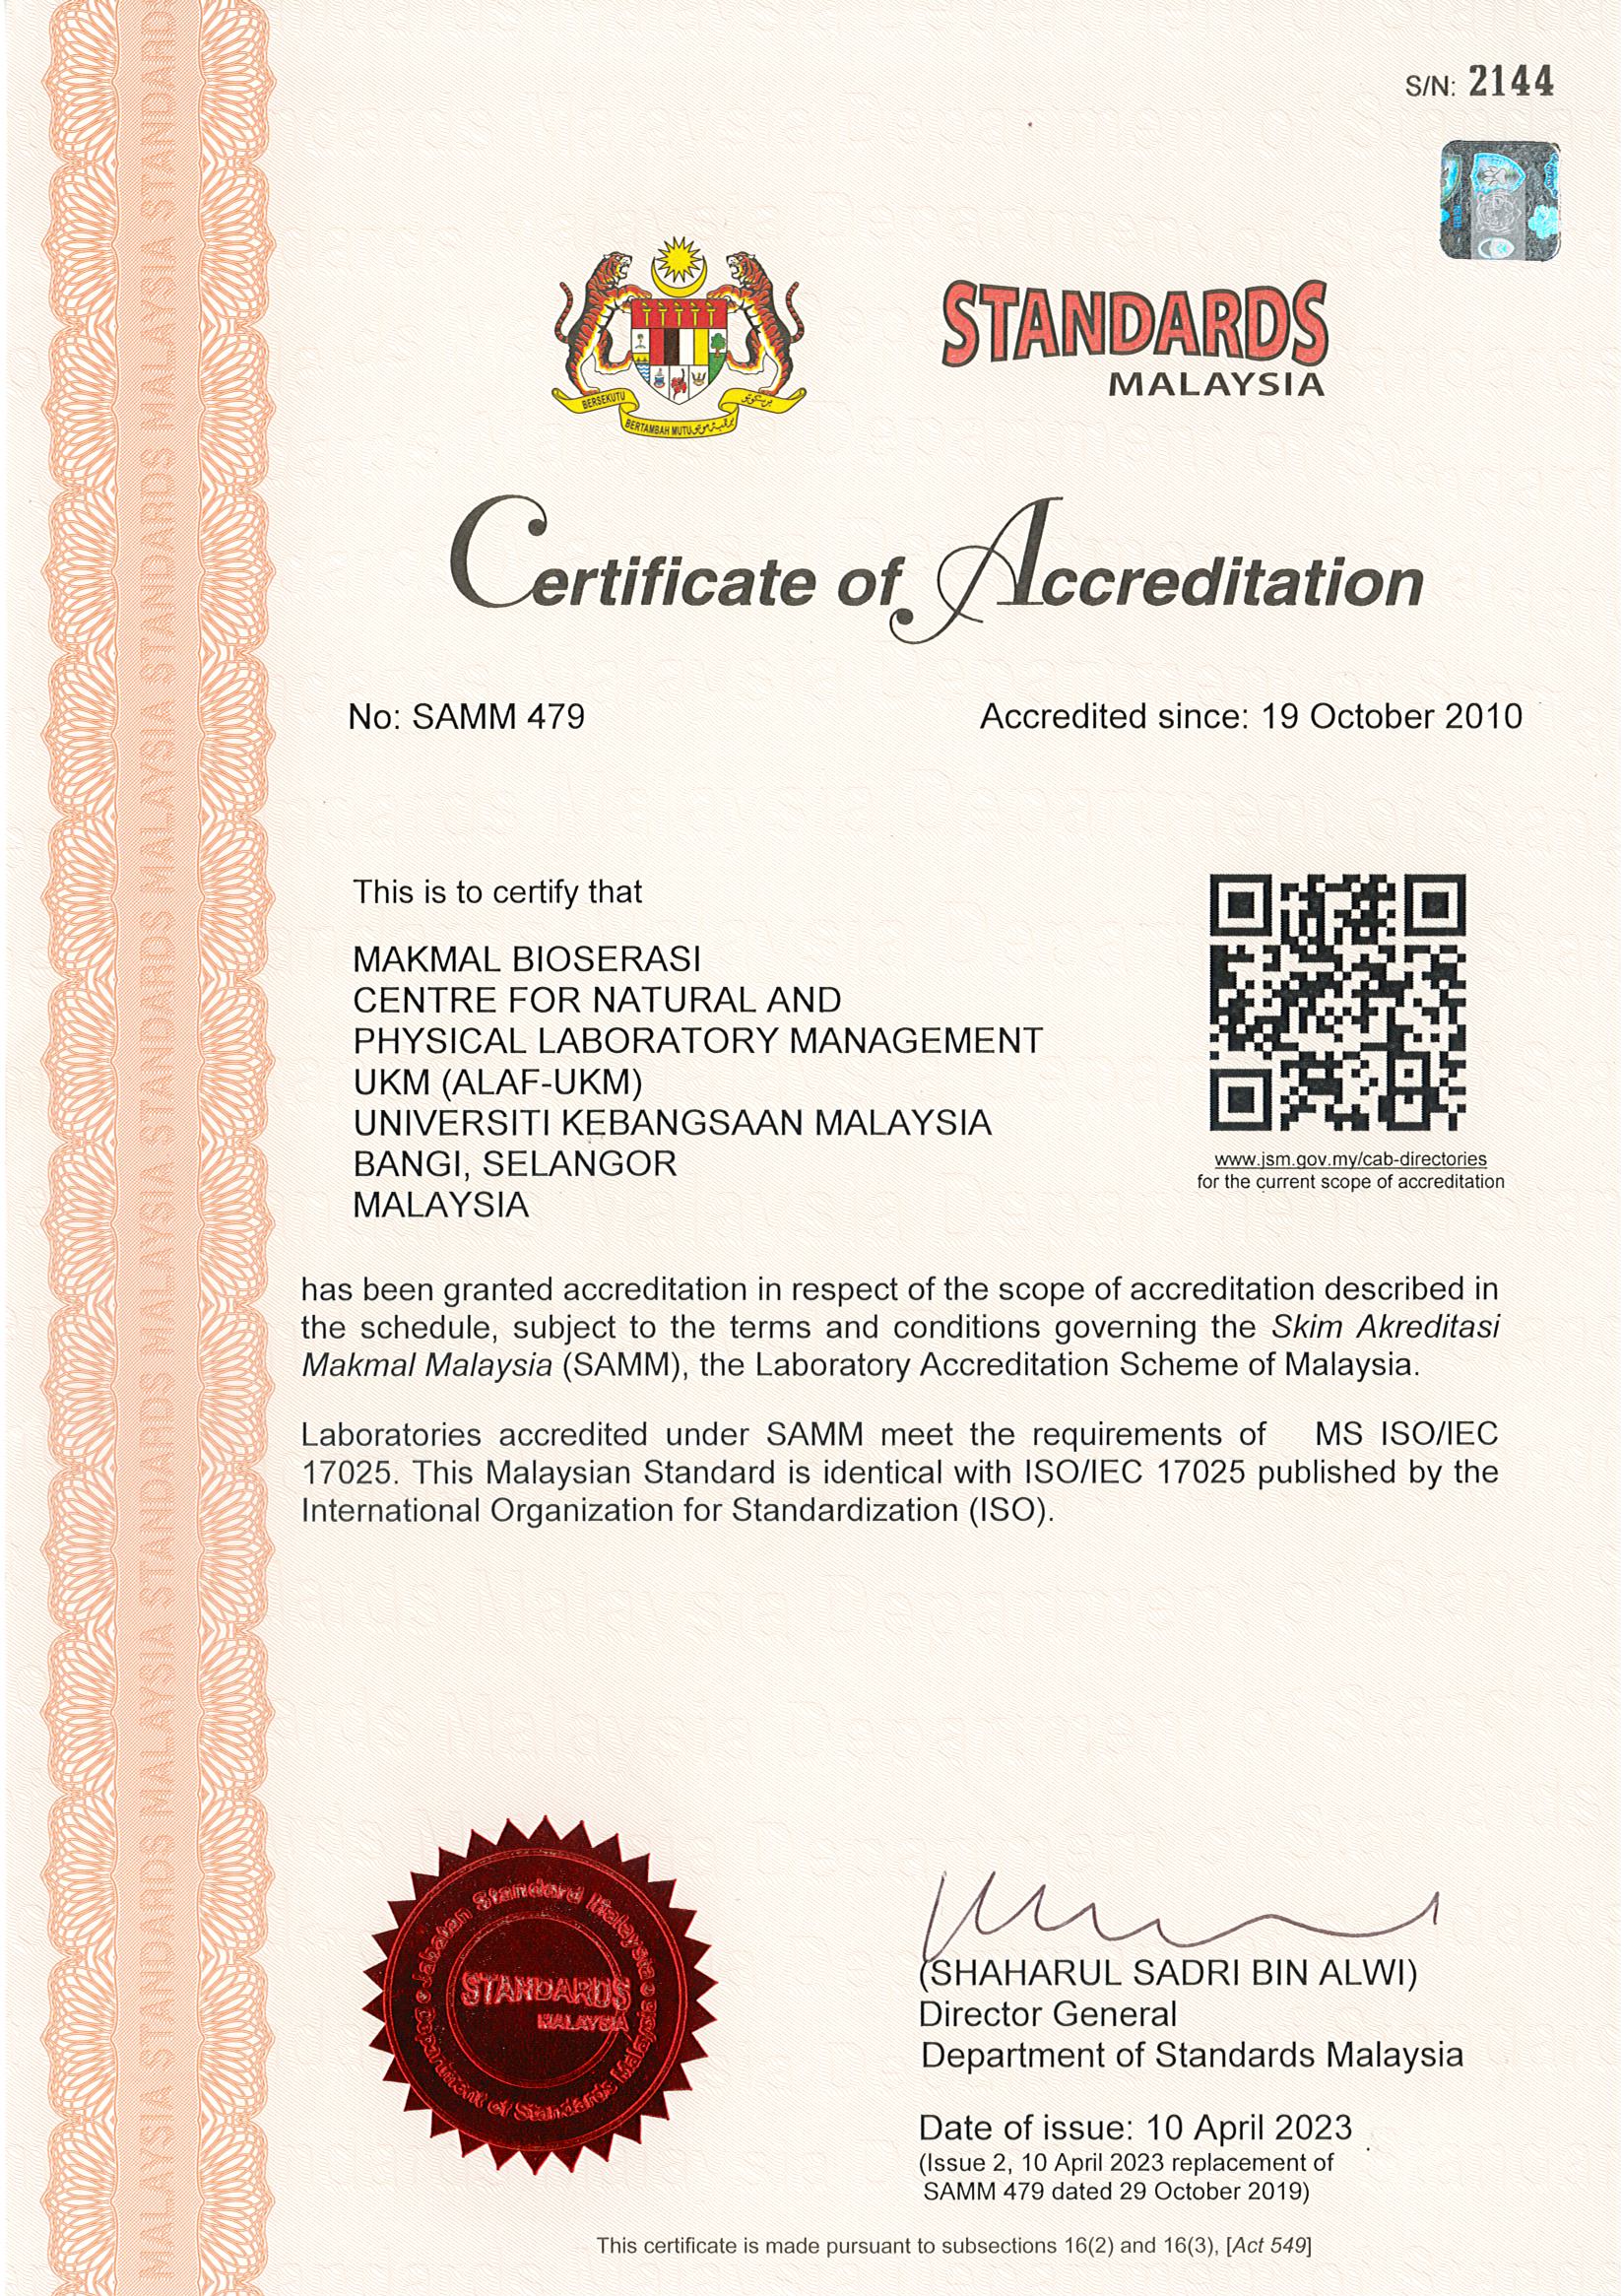 ISO 17025 Certificate